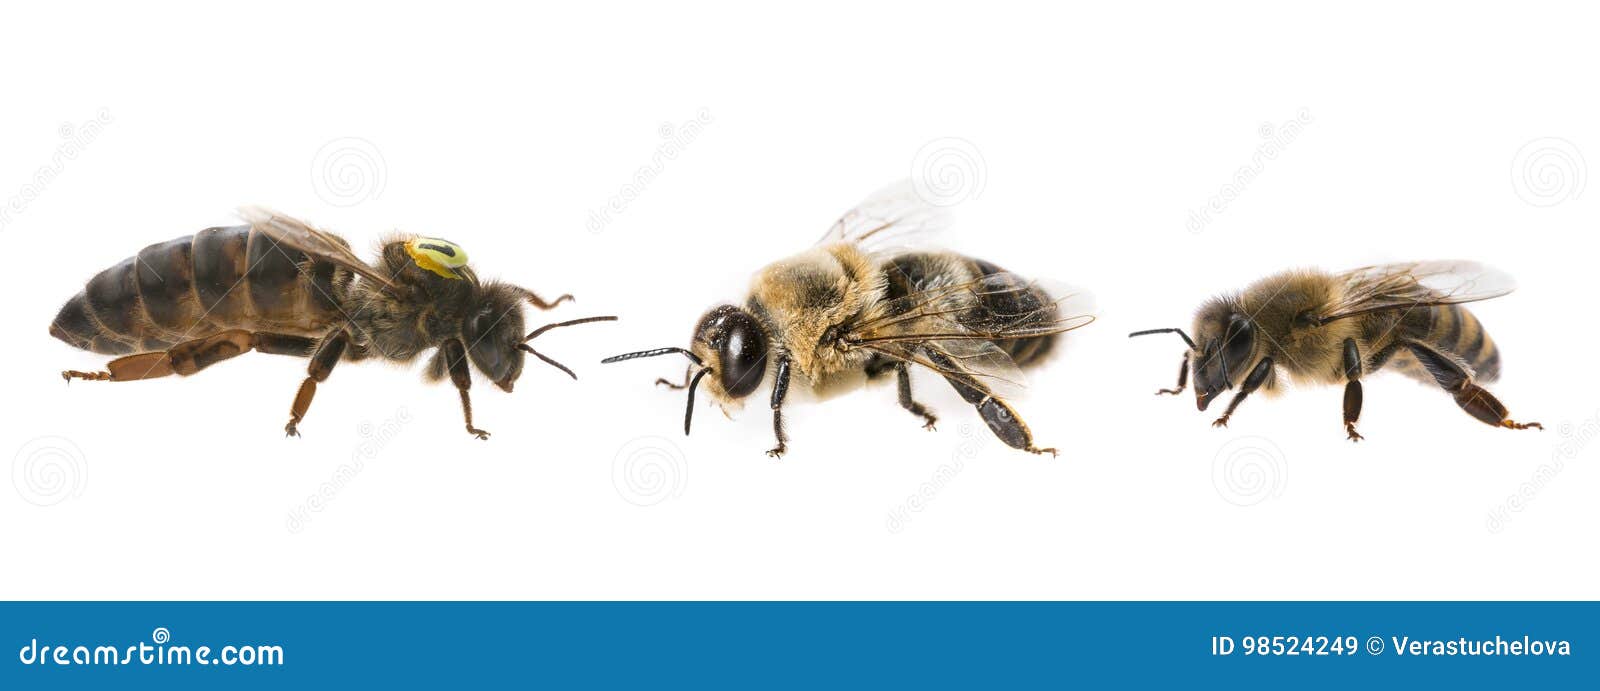 bee queen mother and drone and bee worker - three types of bee